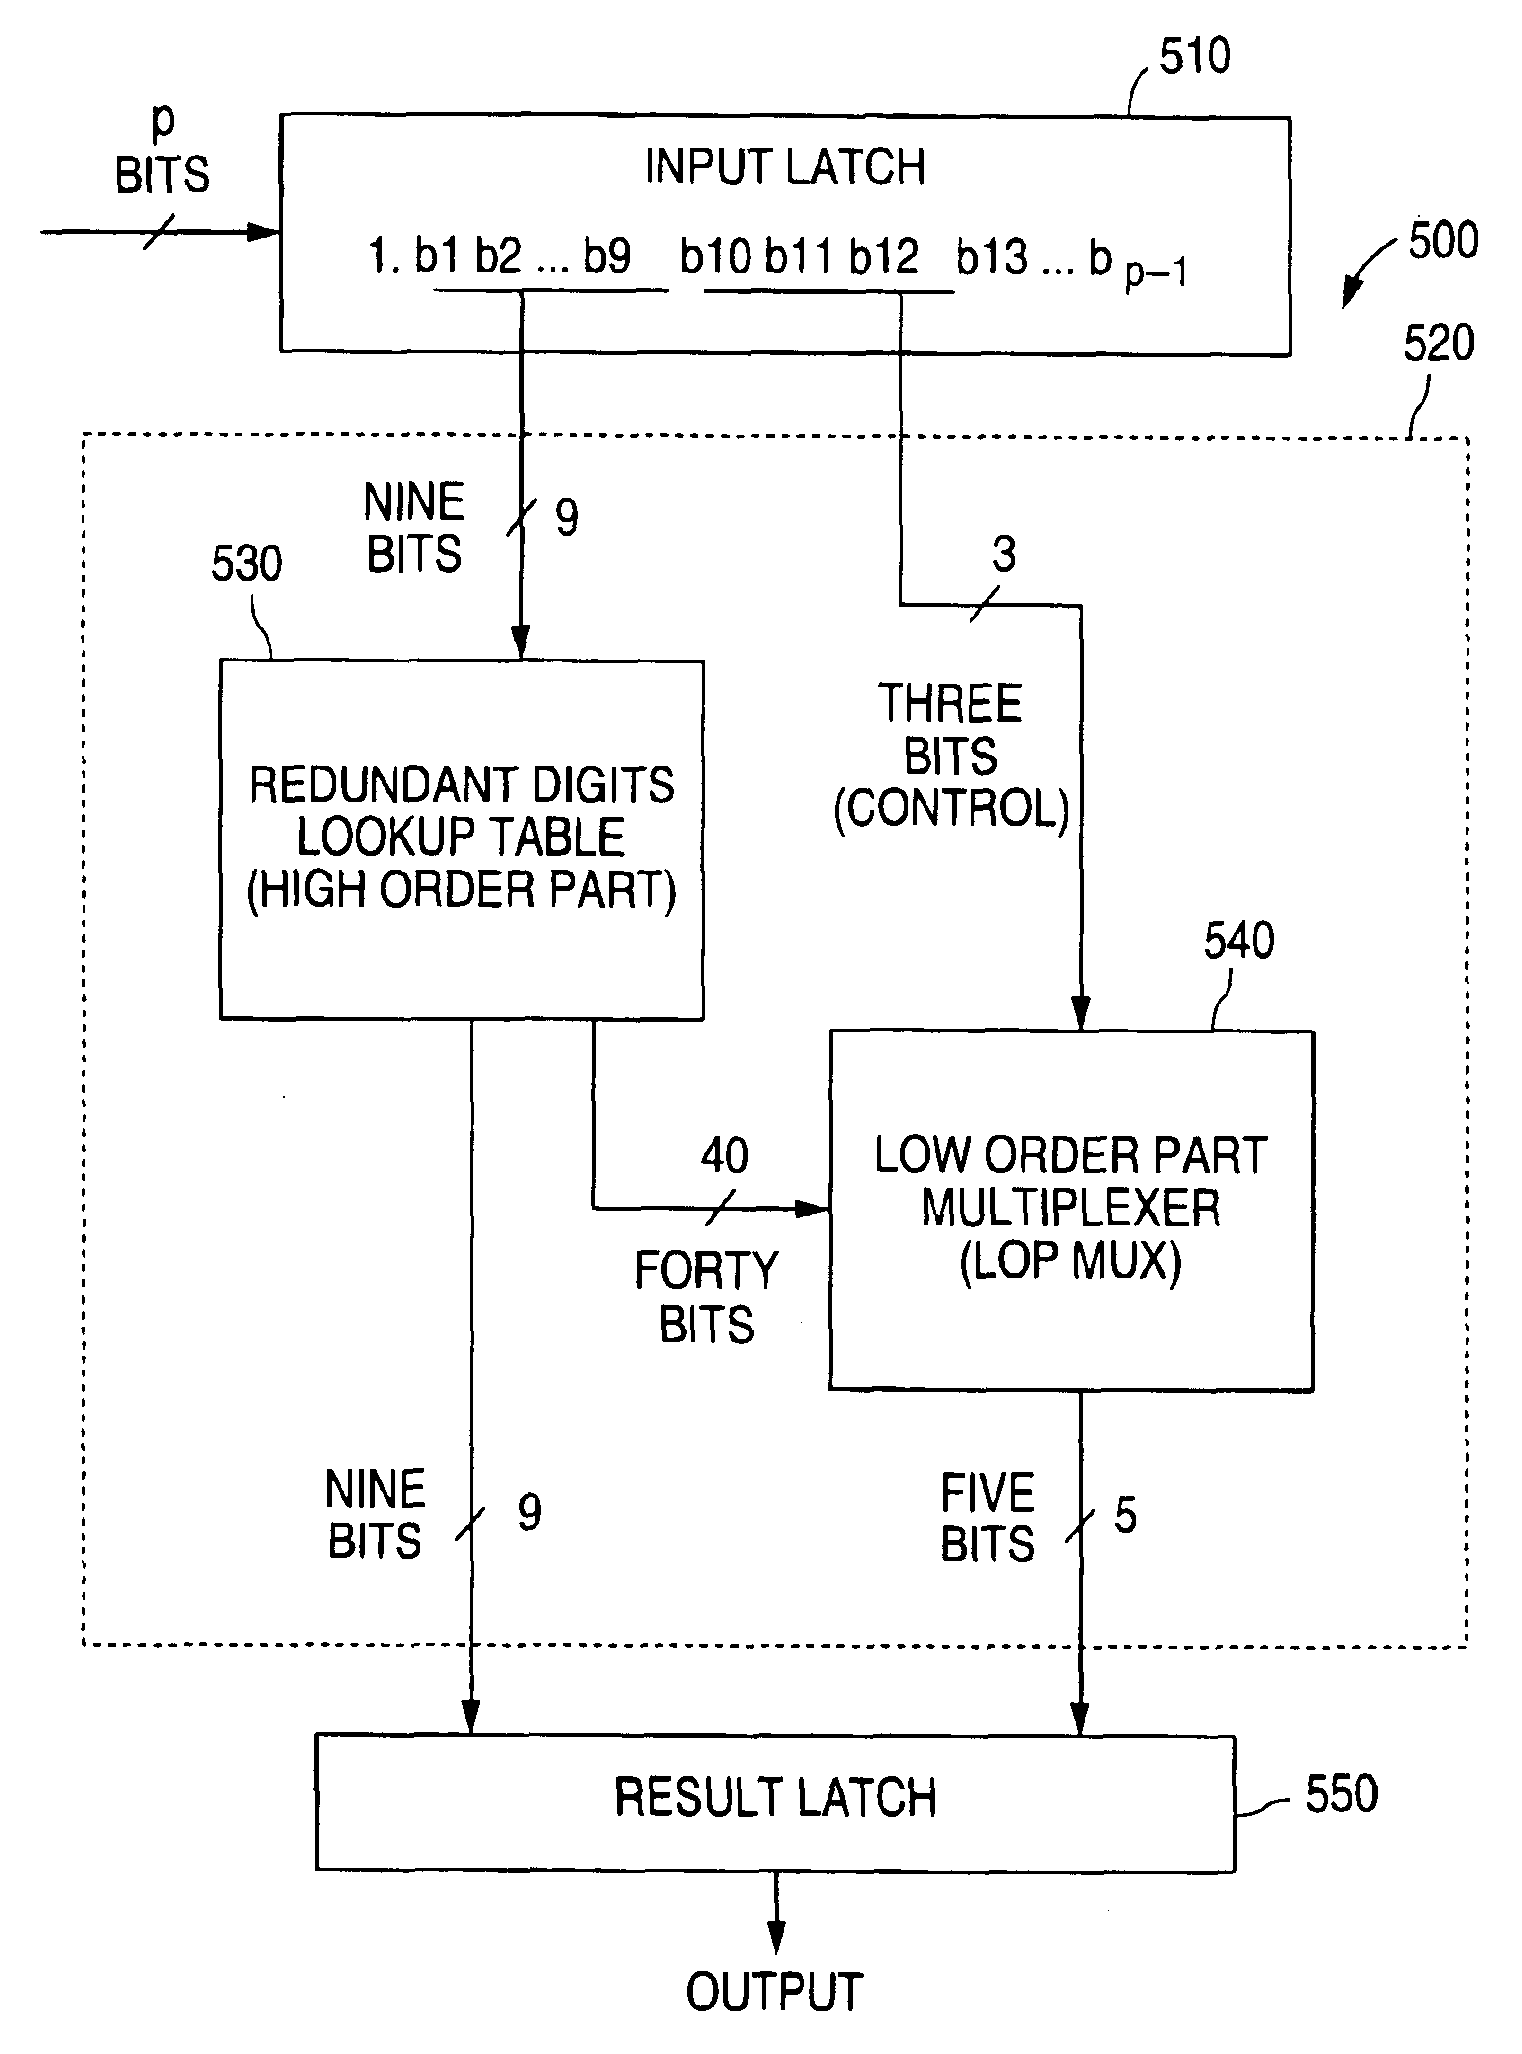 Apparatus and method for providing higher radix redundant digit lookup tables for recoding and compressing function values